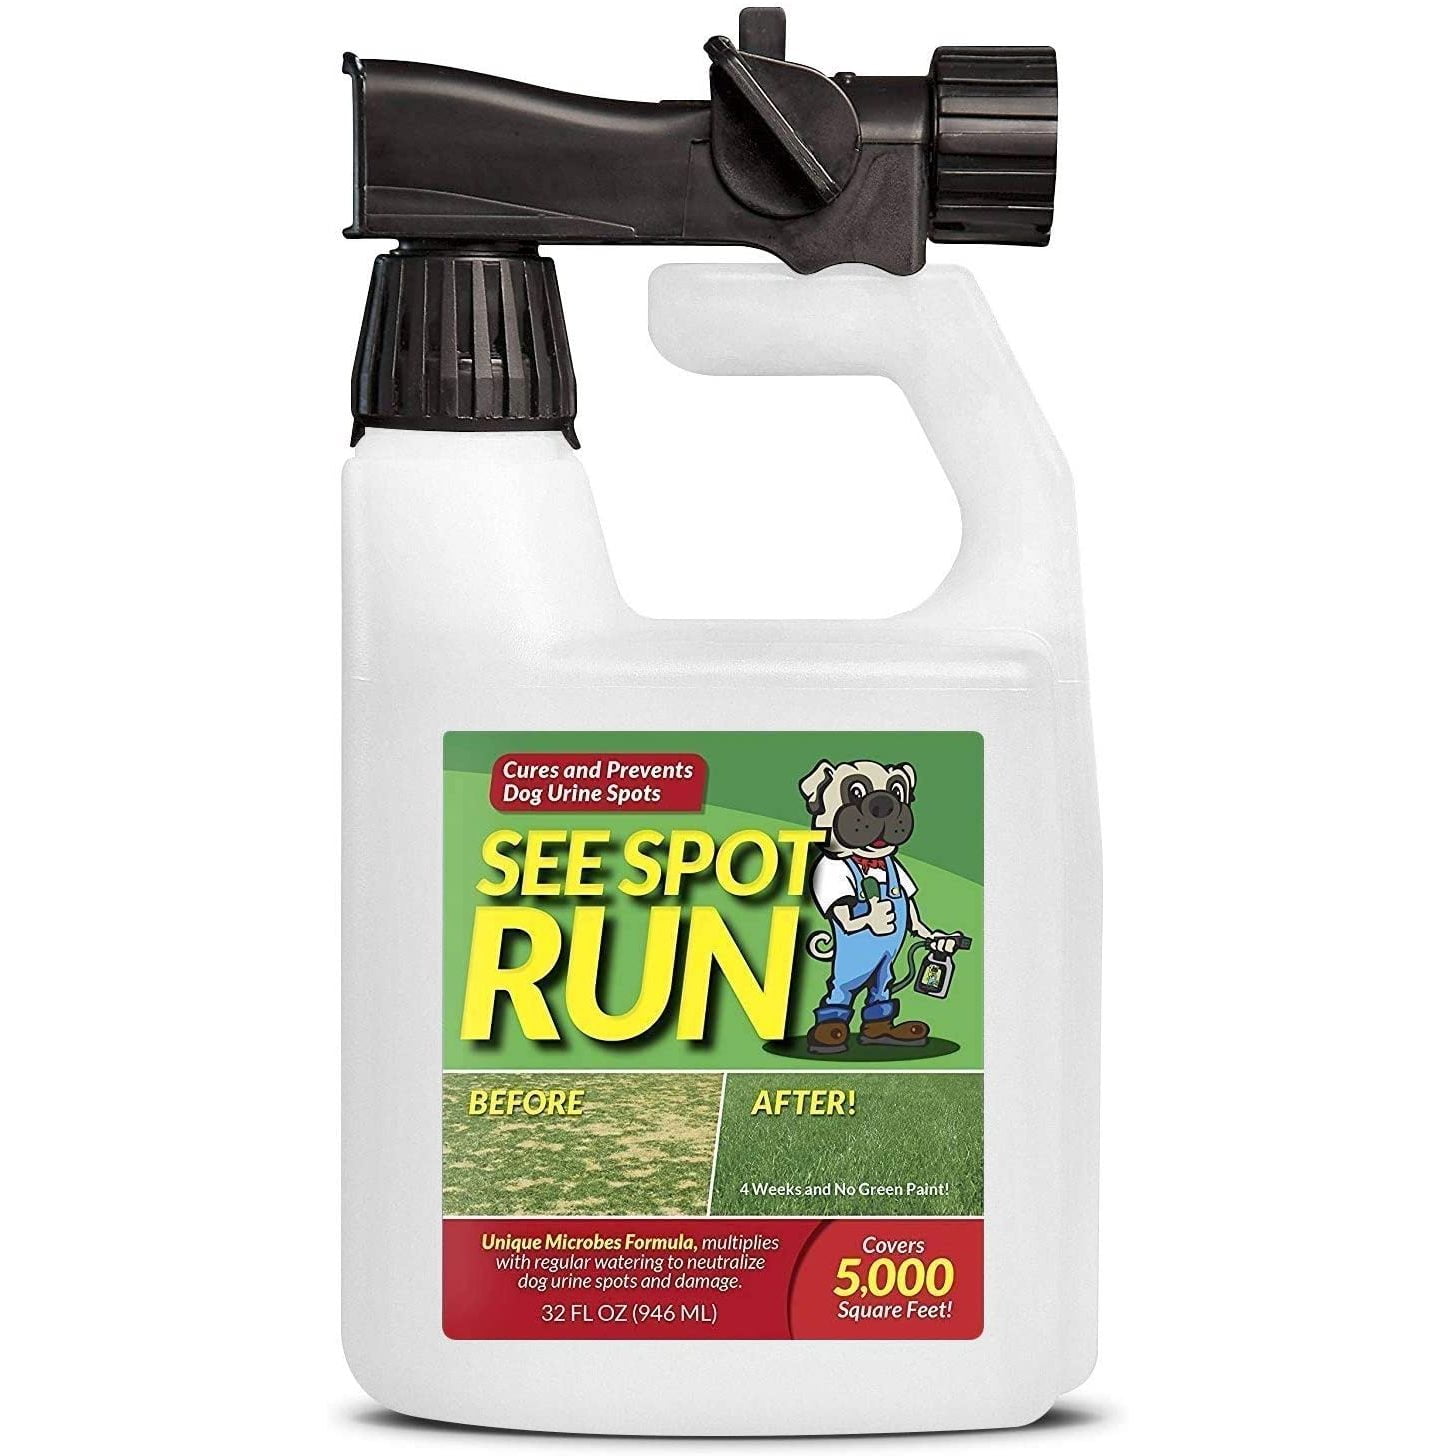 See Spot Run Lawn Protection - Dog Urine Grass Saver That Cures and